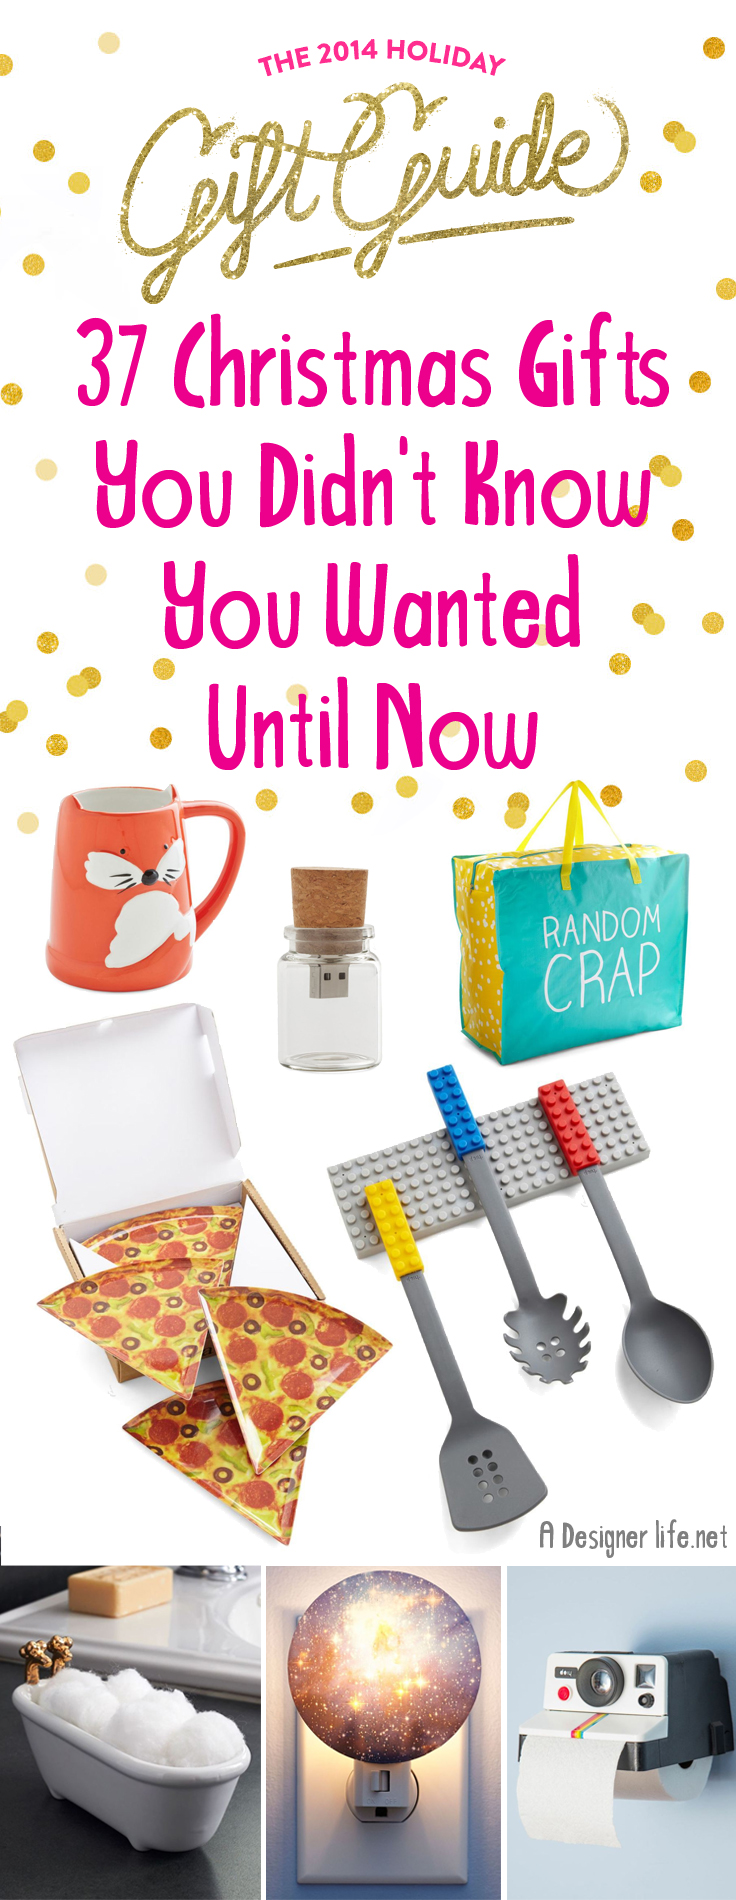 Shop small: Five gifts you didn't know you needed at the just